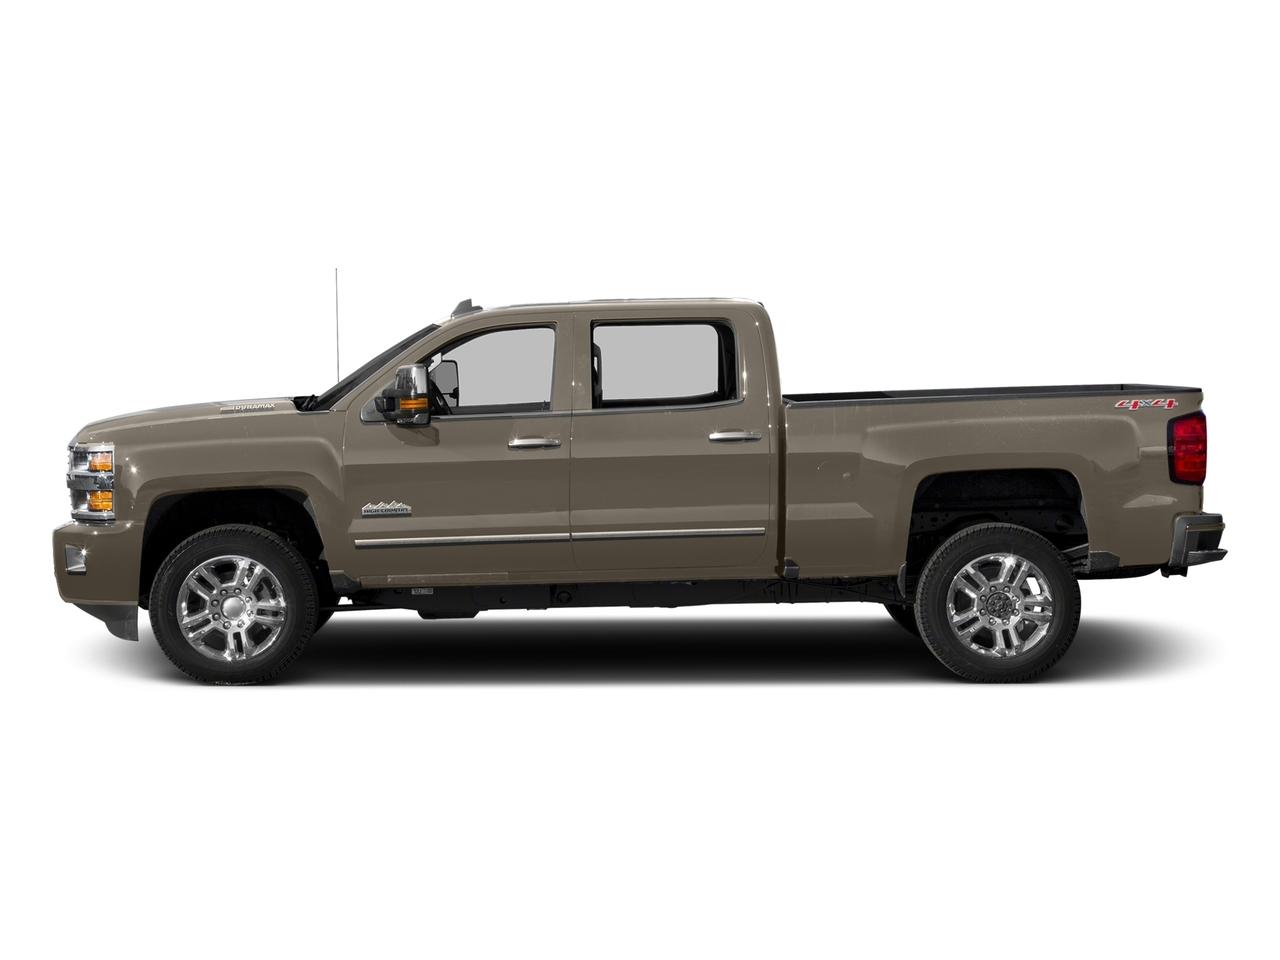 Used 2017 Chevrolet Silverado 2500HD High Country with VIN 1GC1KXEY2HF128593 for sale in Pascagoula, MS